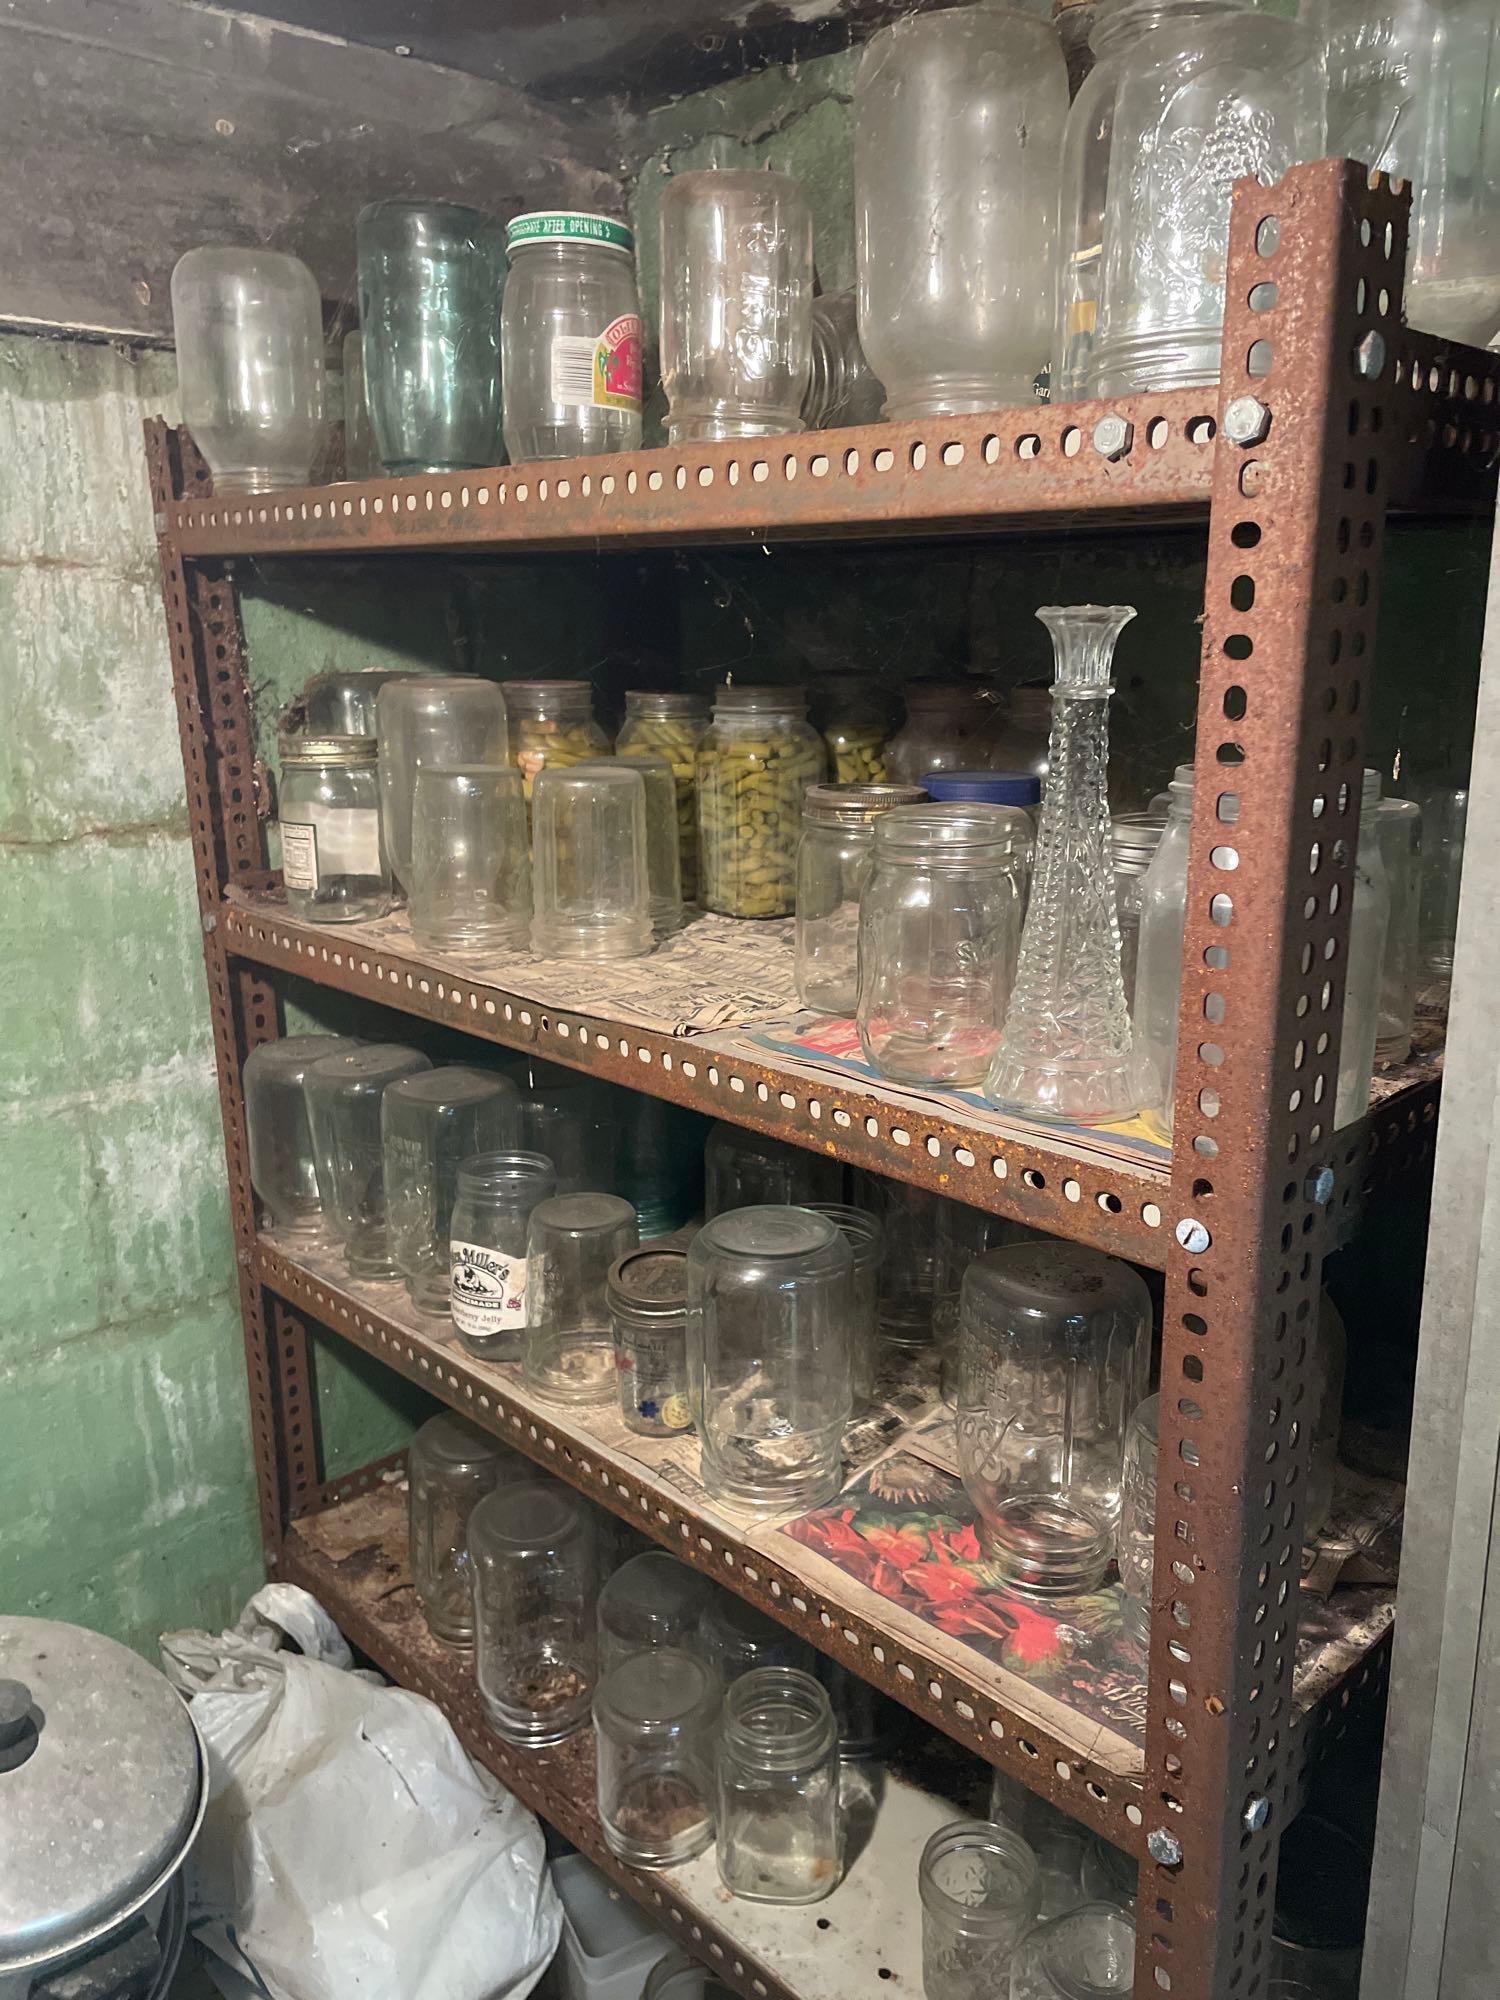 Contents of Canning Room- Canning Supplies